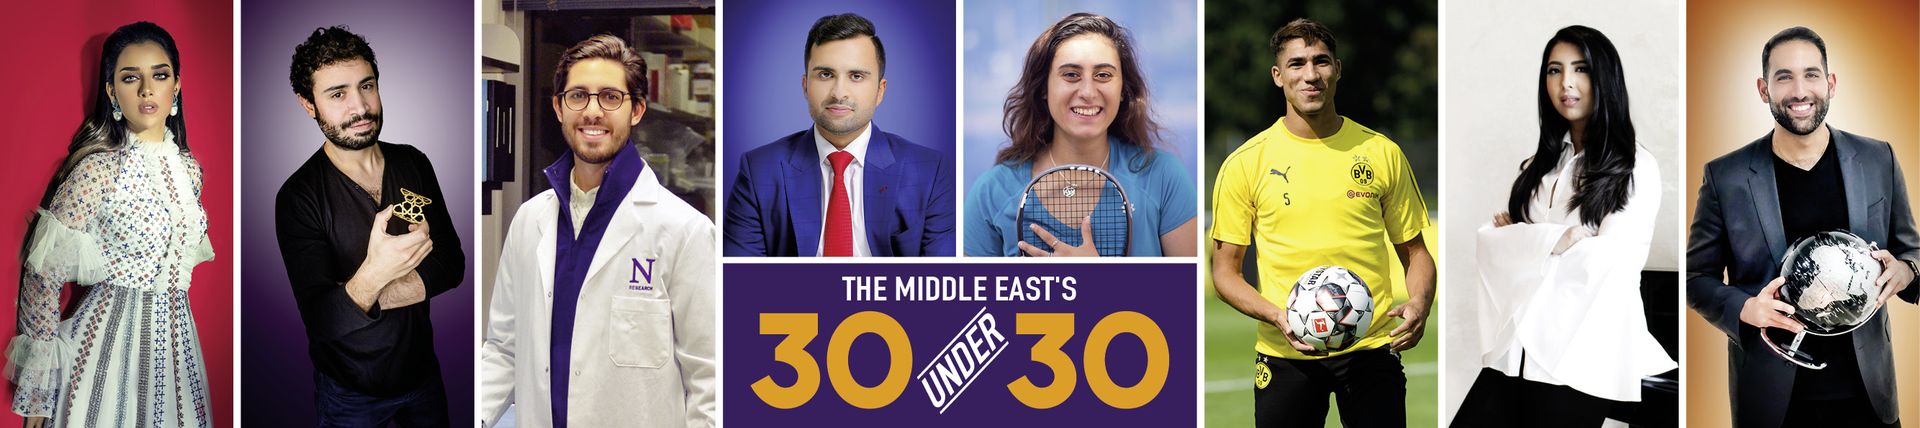 MIDDLE EAST'S 30 UNDER 30 - 2019